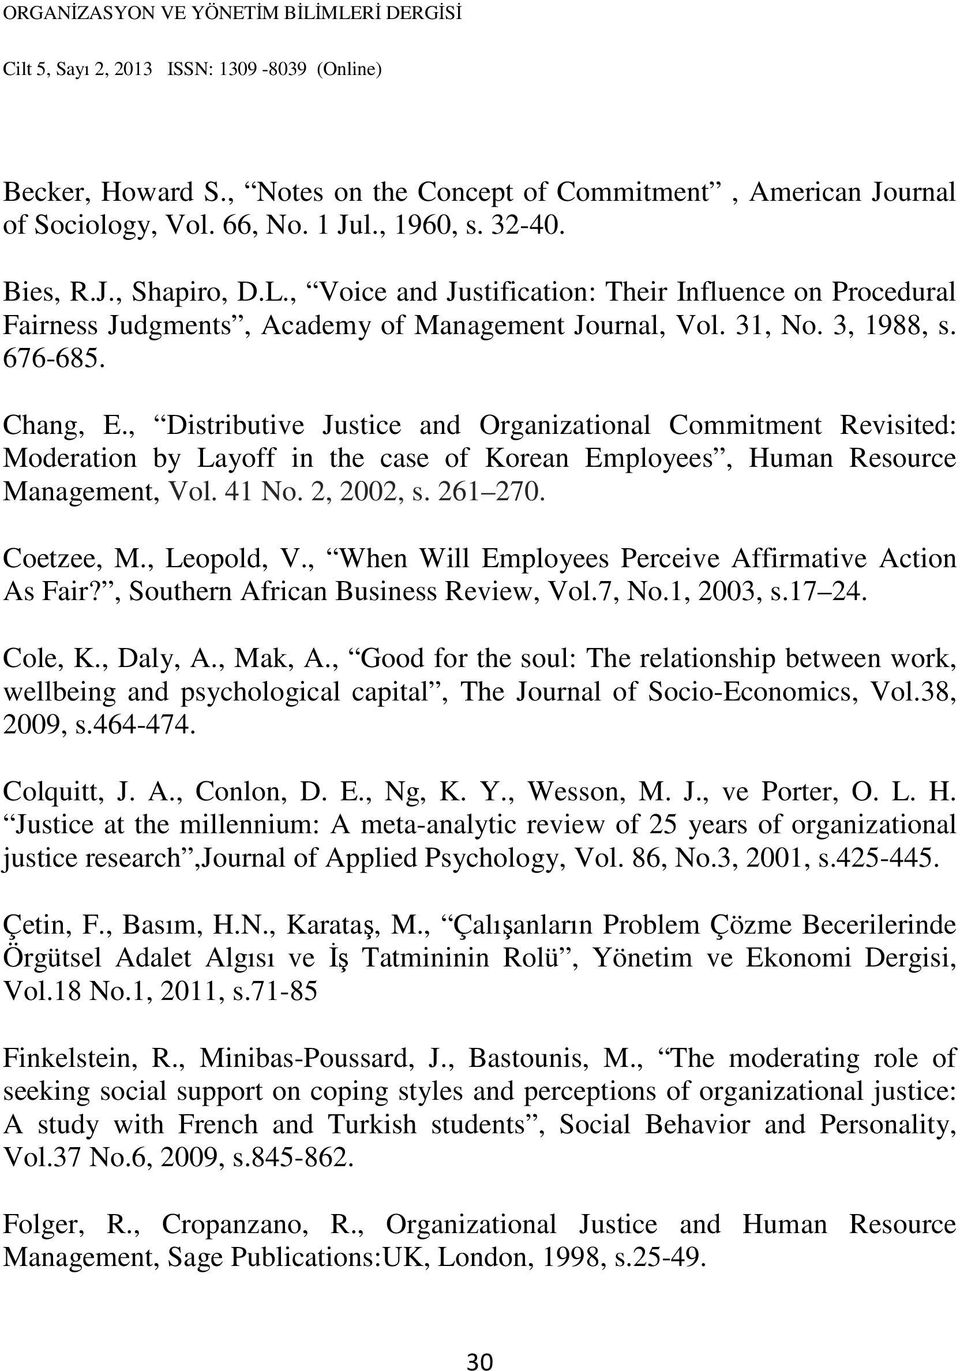 , Distributive Justice and Organizational Commitment Revisited: Moderation by Layoff in the case of Korean Employees, Human Resource Management, Vol. 41 No. 2, 2002, s. 261 270. Coetzee, M.